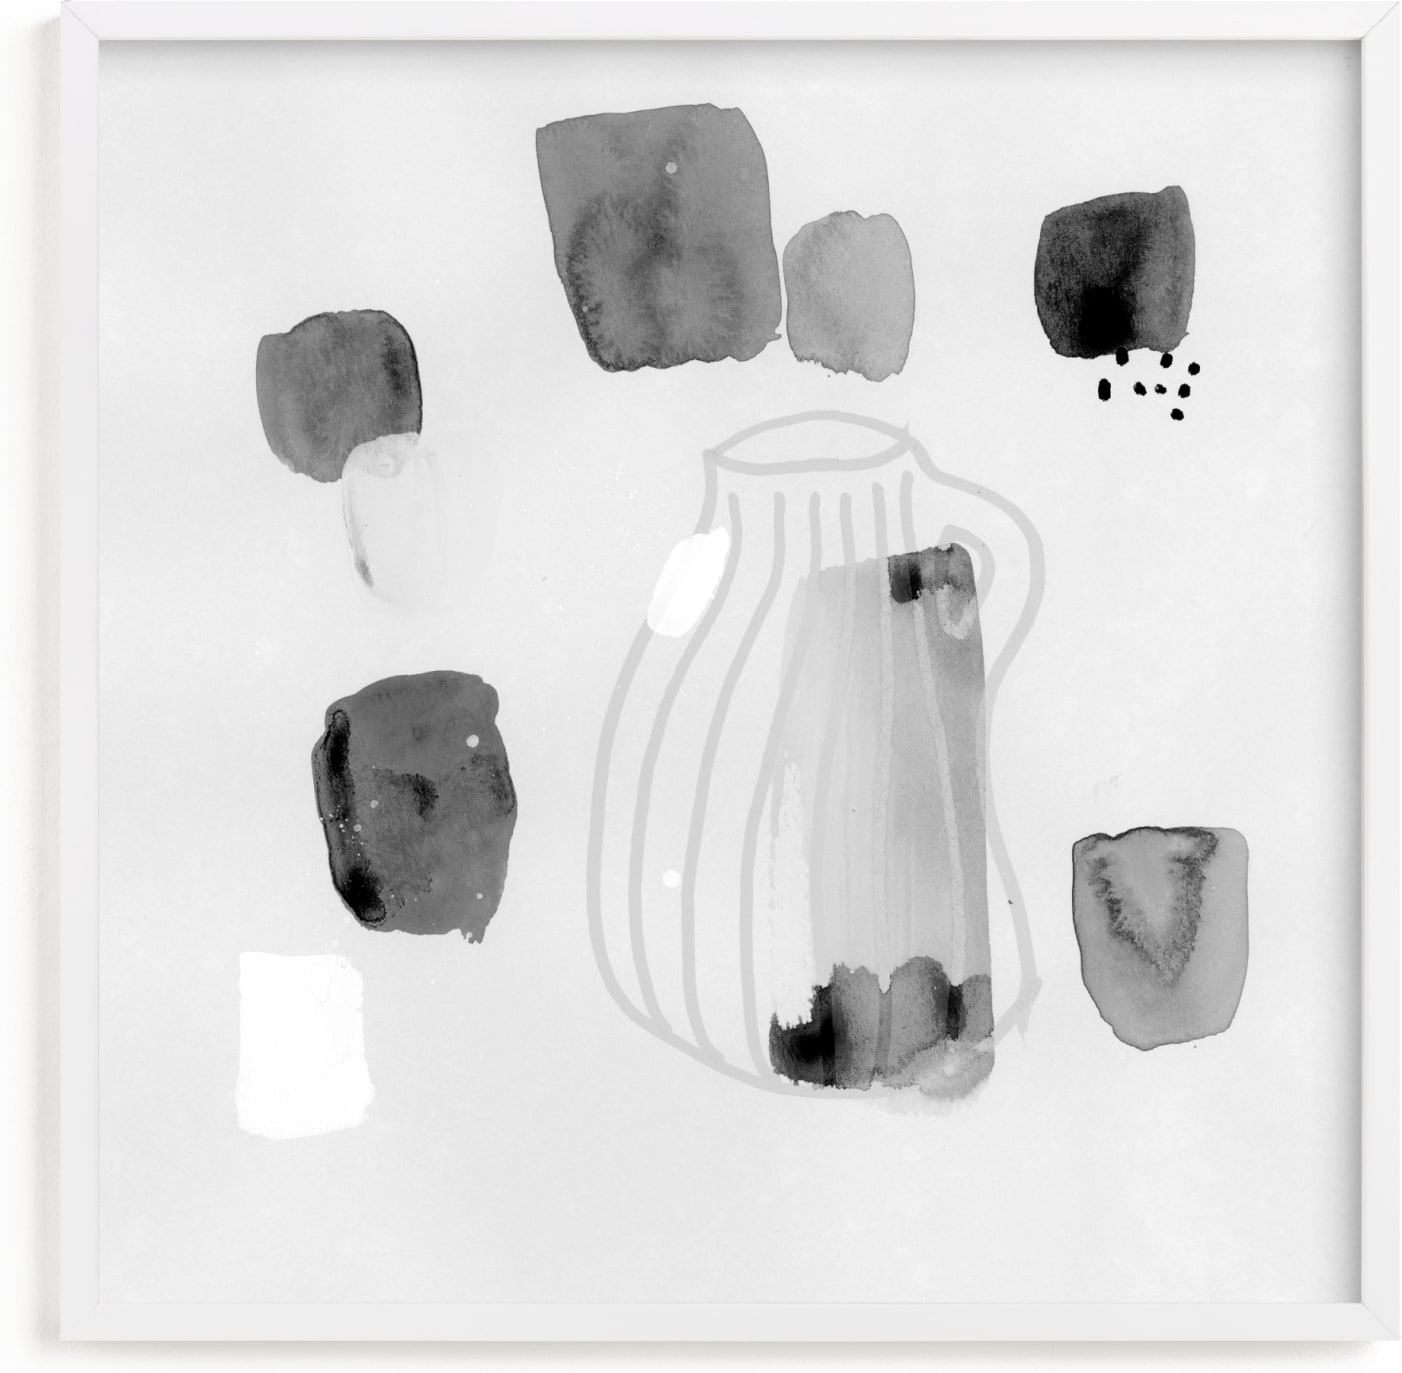 This is a white art by Lindsay Megahed called Vase Study.